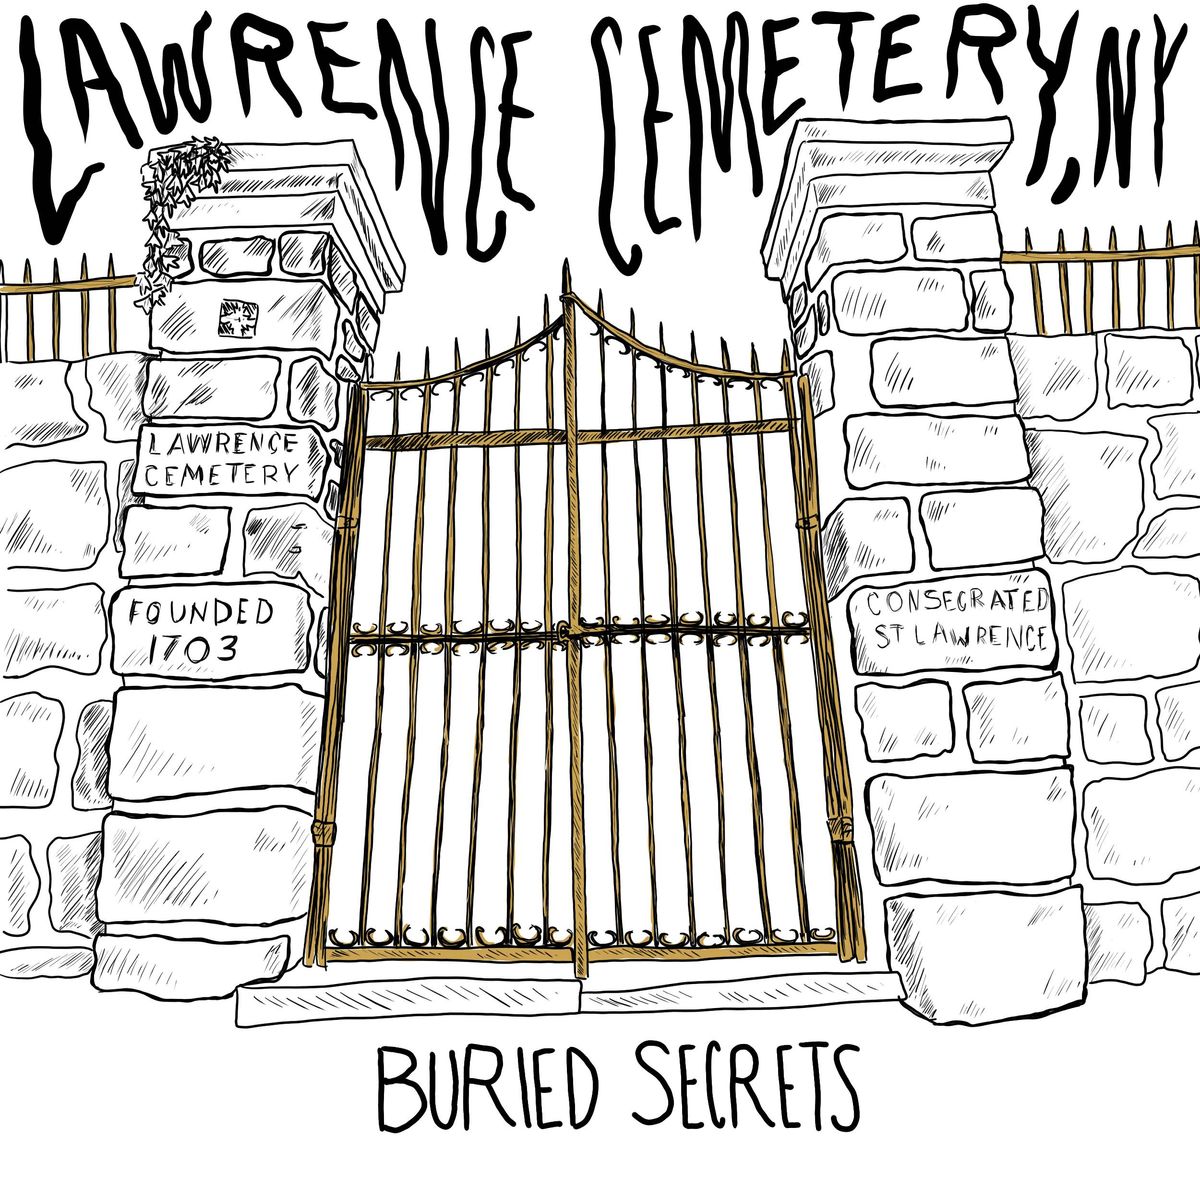 Lawrence Family Cemetery, Astoria, Queens